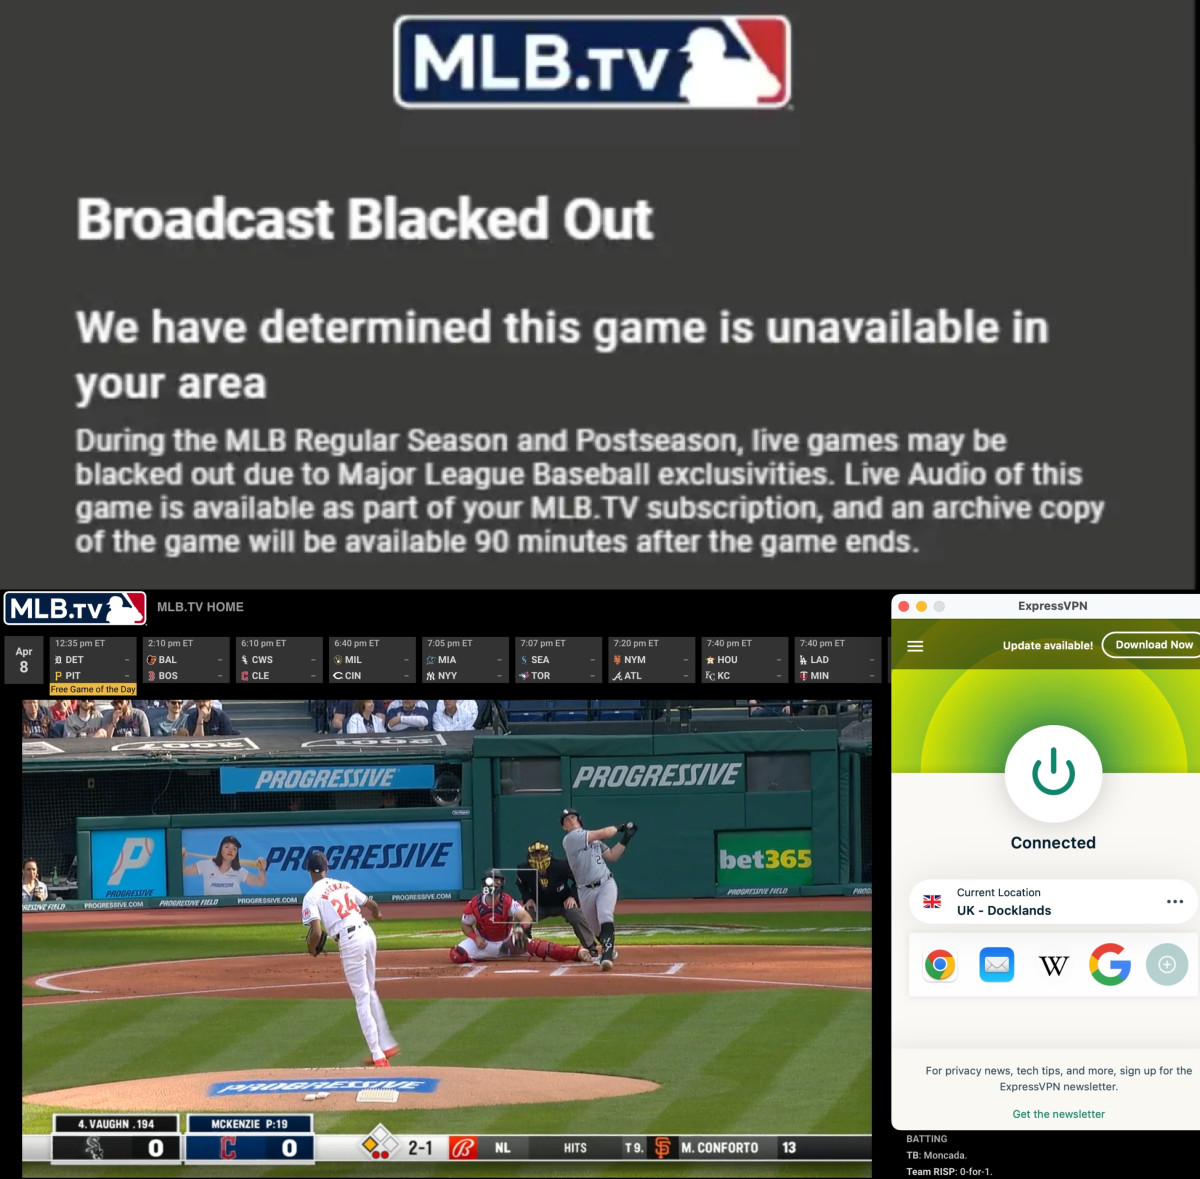 VPN offers a workaround to watch blacked-out MBL games